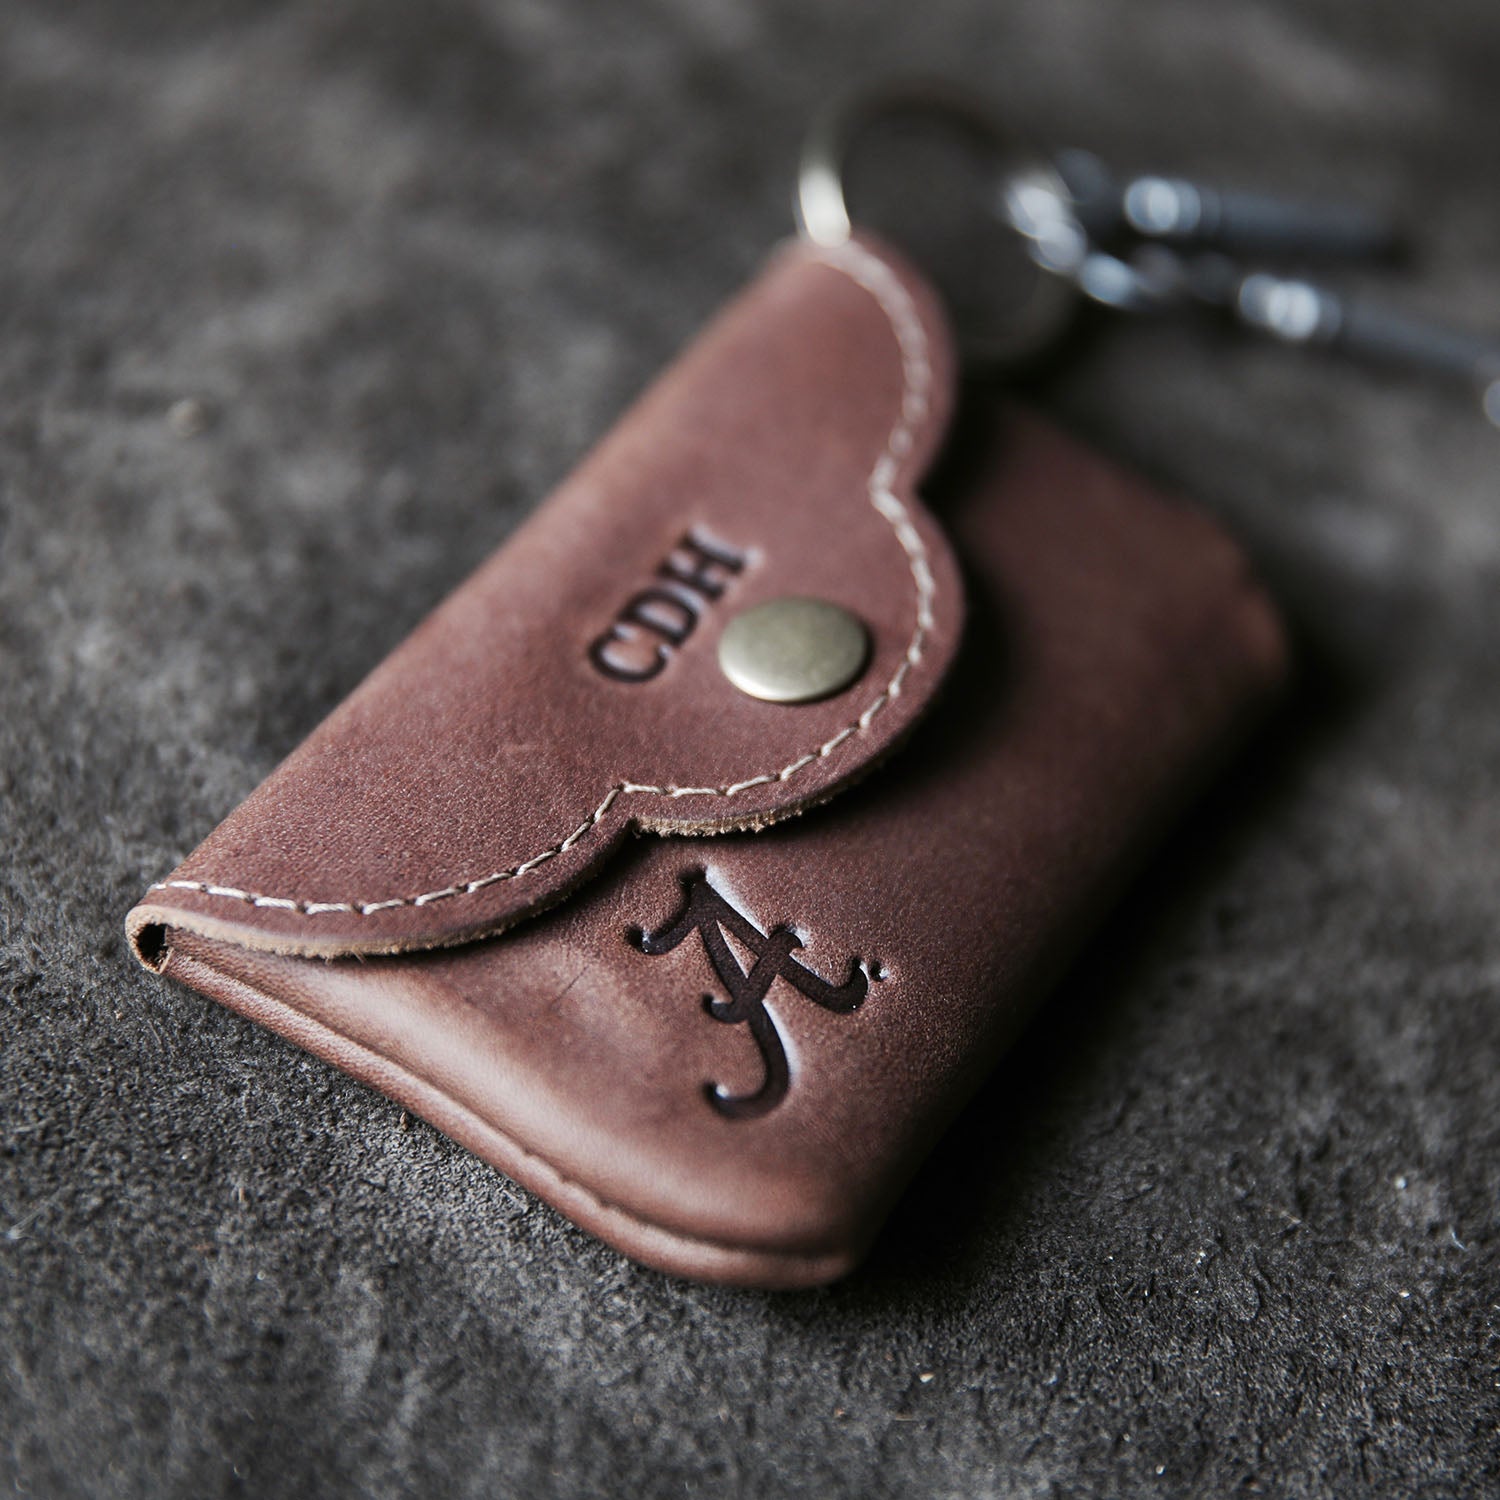 Fine leather scallop keychain wallet with personalized initials and Alabama logo